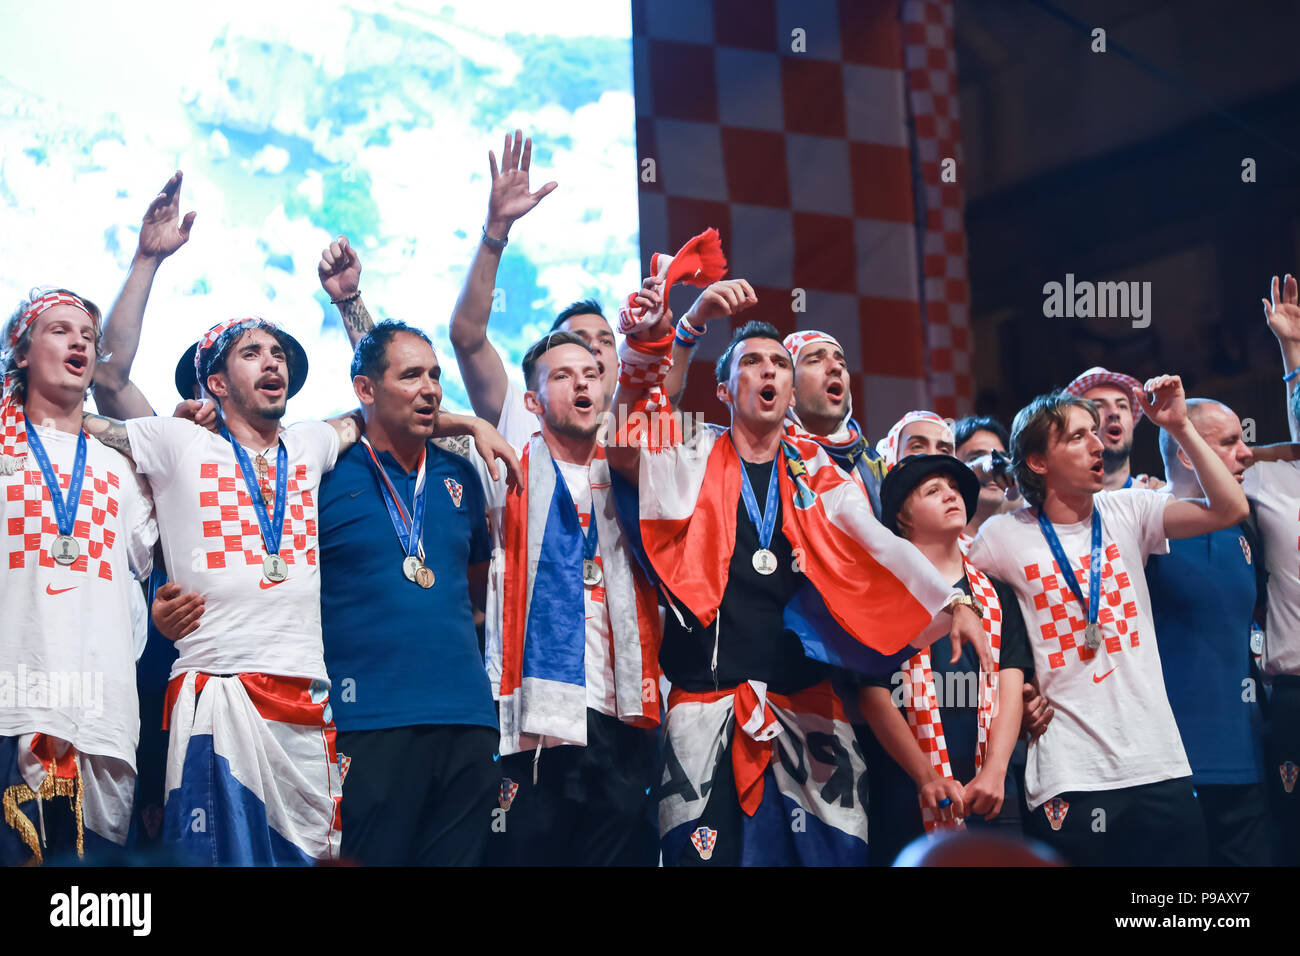 Zagreb, Croatia. 16th July, 2018. Welcome ceremony of Croatian football national team that won 2nd place, silver medal on Fifa World Cup 2018 on Ban Jelacic Square in Zagreb, Croatia. Croatian football national team celebrating on the stage. Credit: Goran Jakuš/Alamy Live News Stock Photo